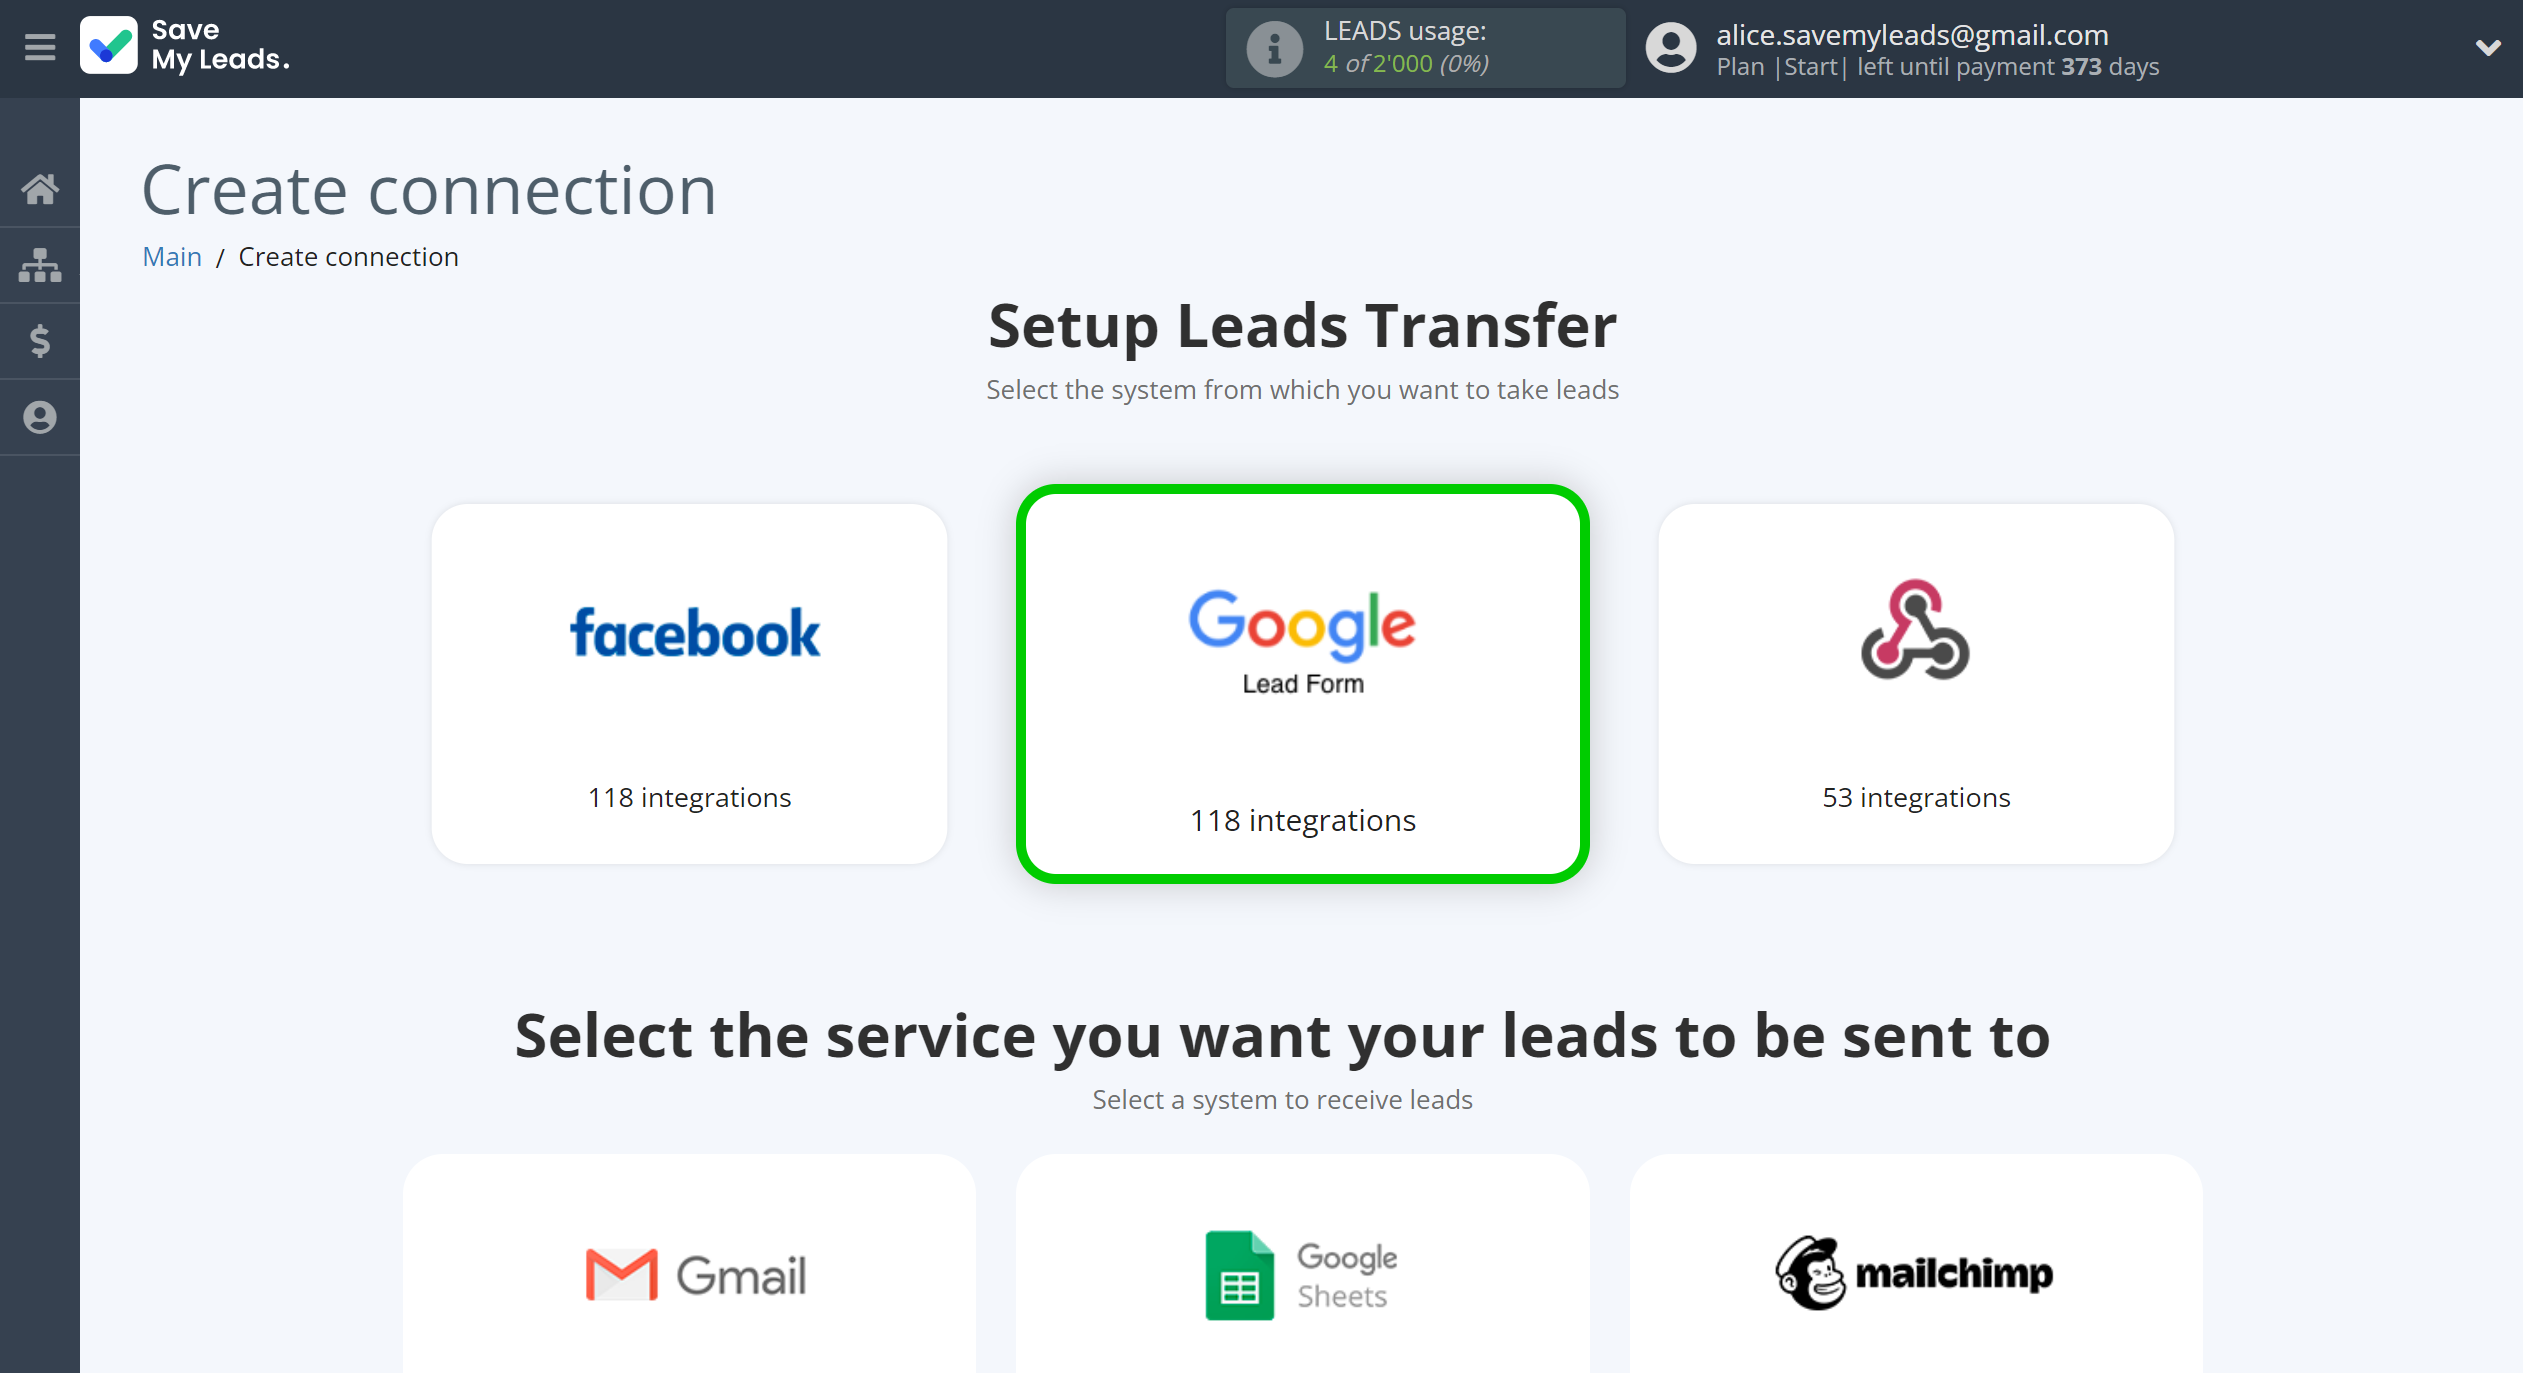 How to Connect Google Lead Form with Amazon SES | Data Source system selection